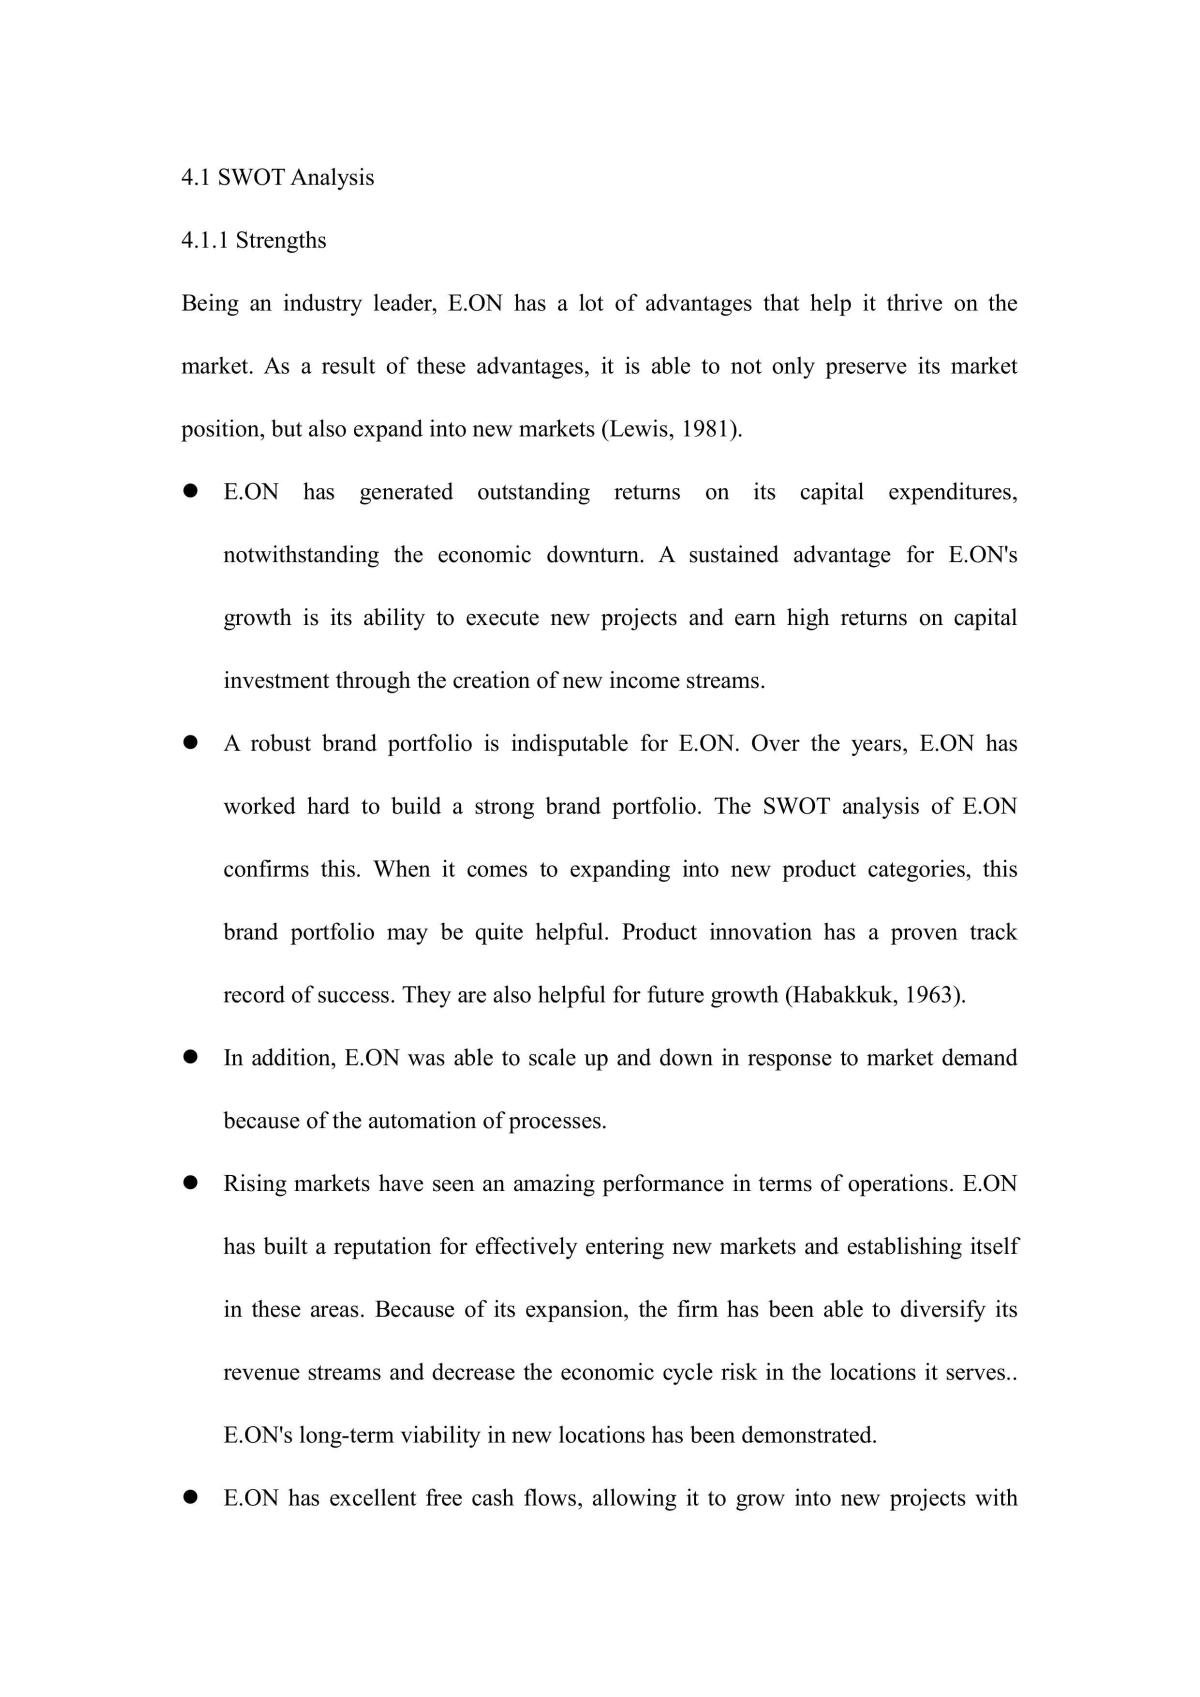 Analysis of E.ON’s Corporate Level Strategy - Page 12